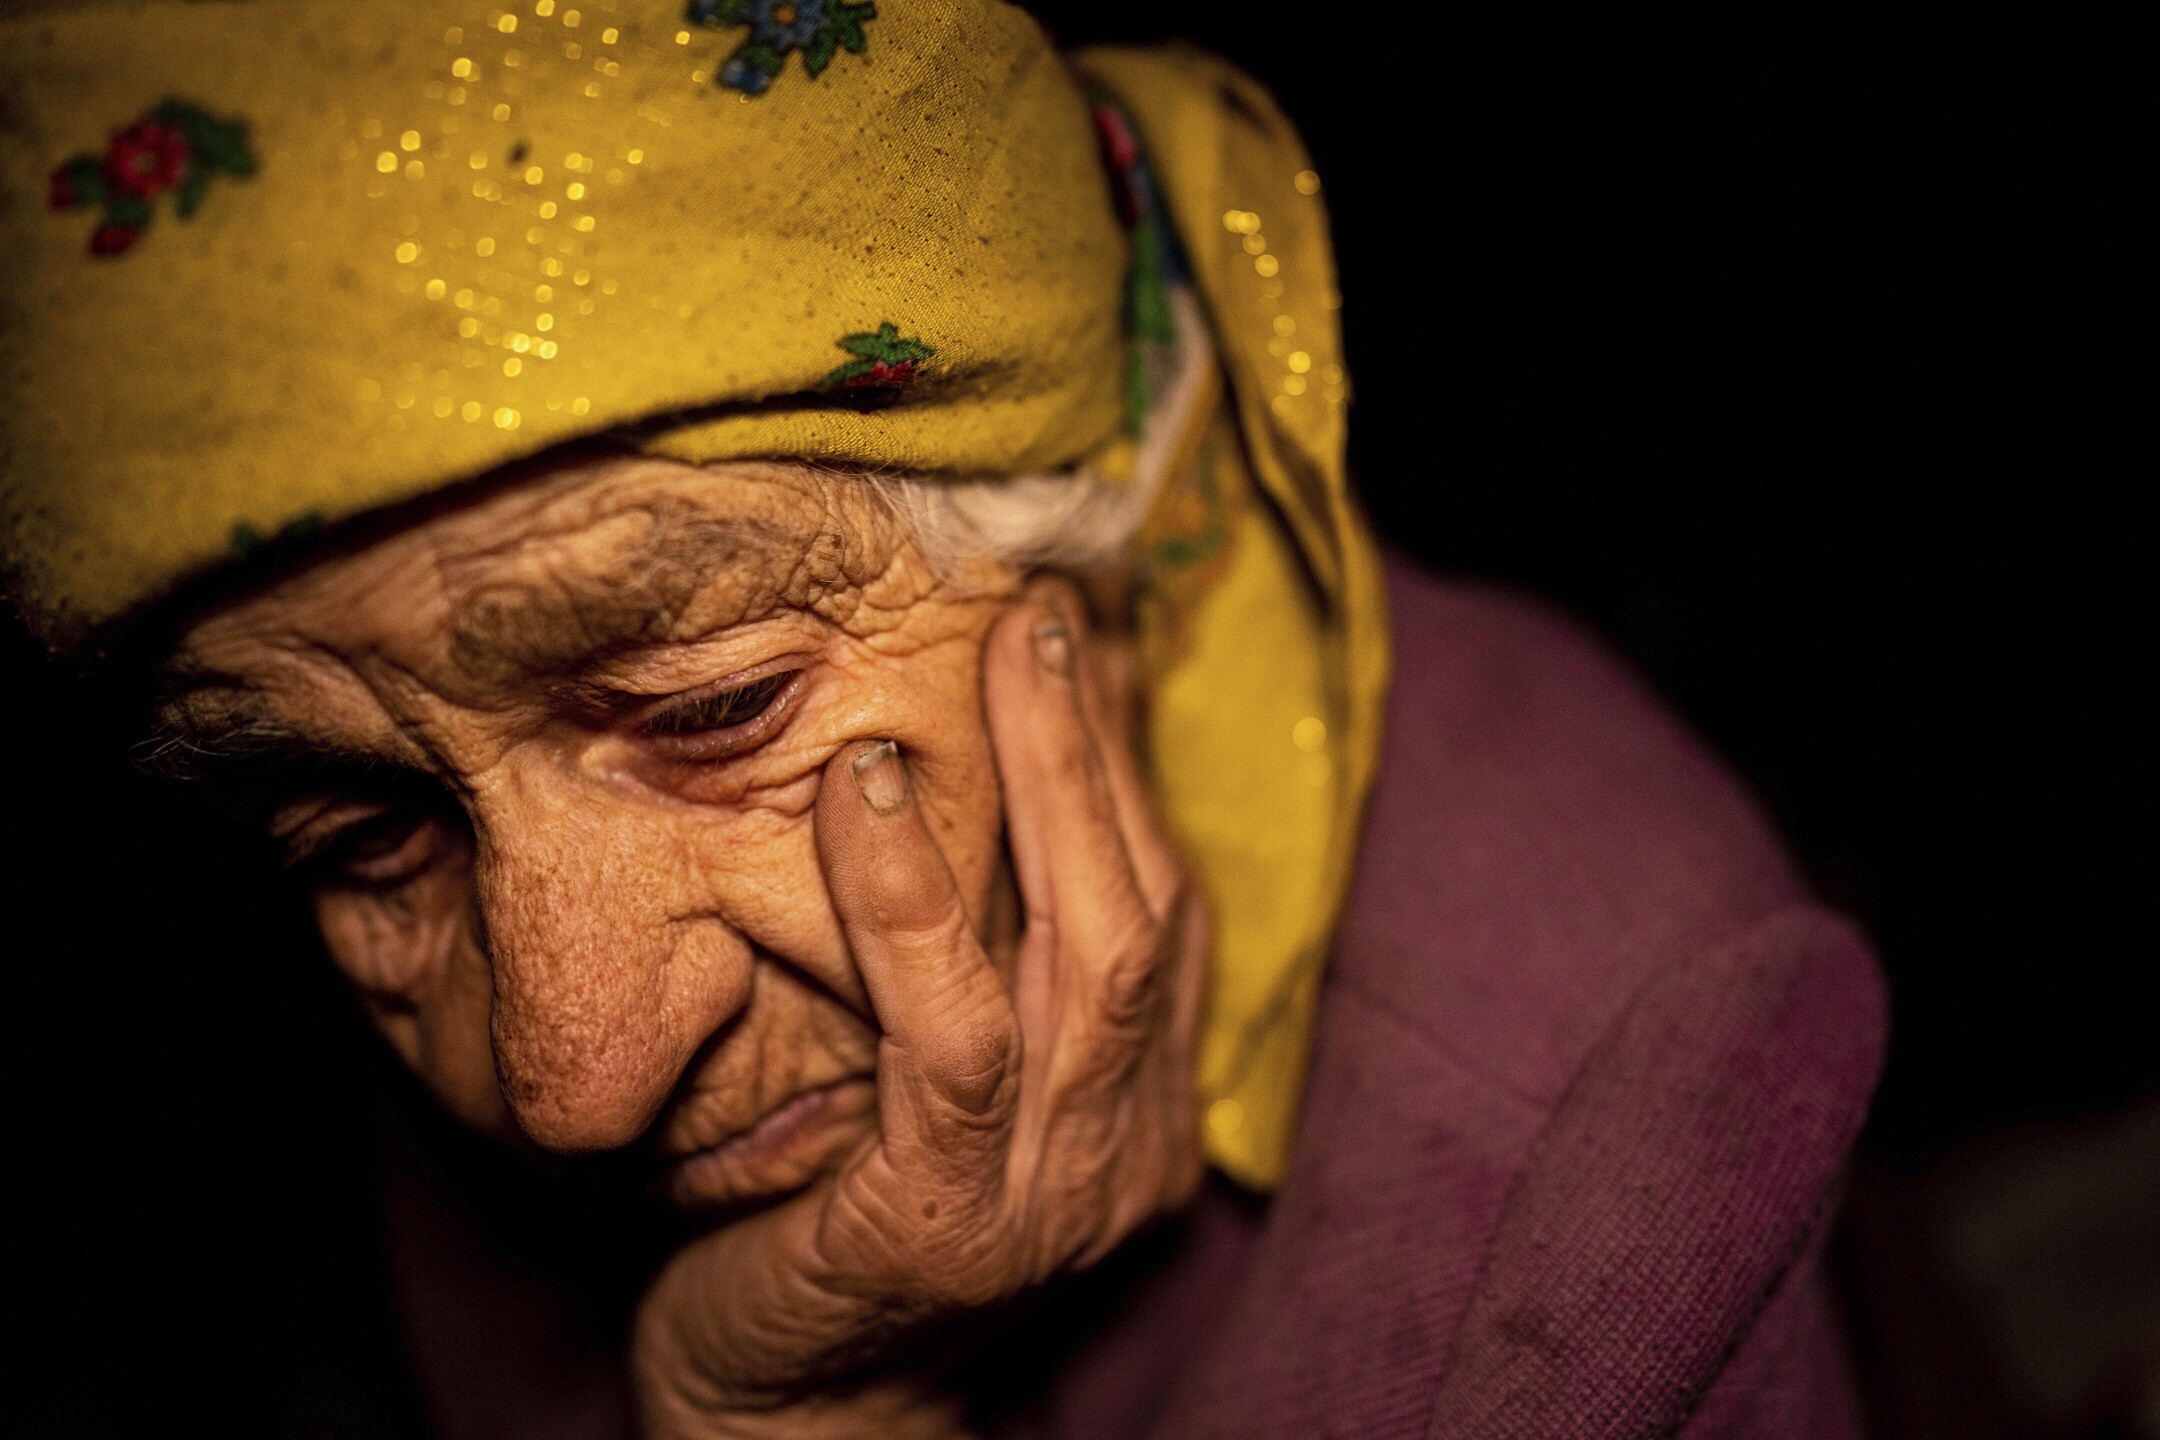 Nina Gonchar, 93, sits in her house, which was mostly destroyed by Russian forces, in the village of Bogorodychne, Ukraine, on Jan. 7, 2023, shortly after the village was retaken by the Ukrainian army. Gonchar's son Vasyliy and his wife Liubov were killed by Russian shelling on July 10, 2022. (AP Photo/Evgeniy Maloletka)